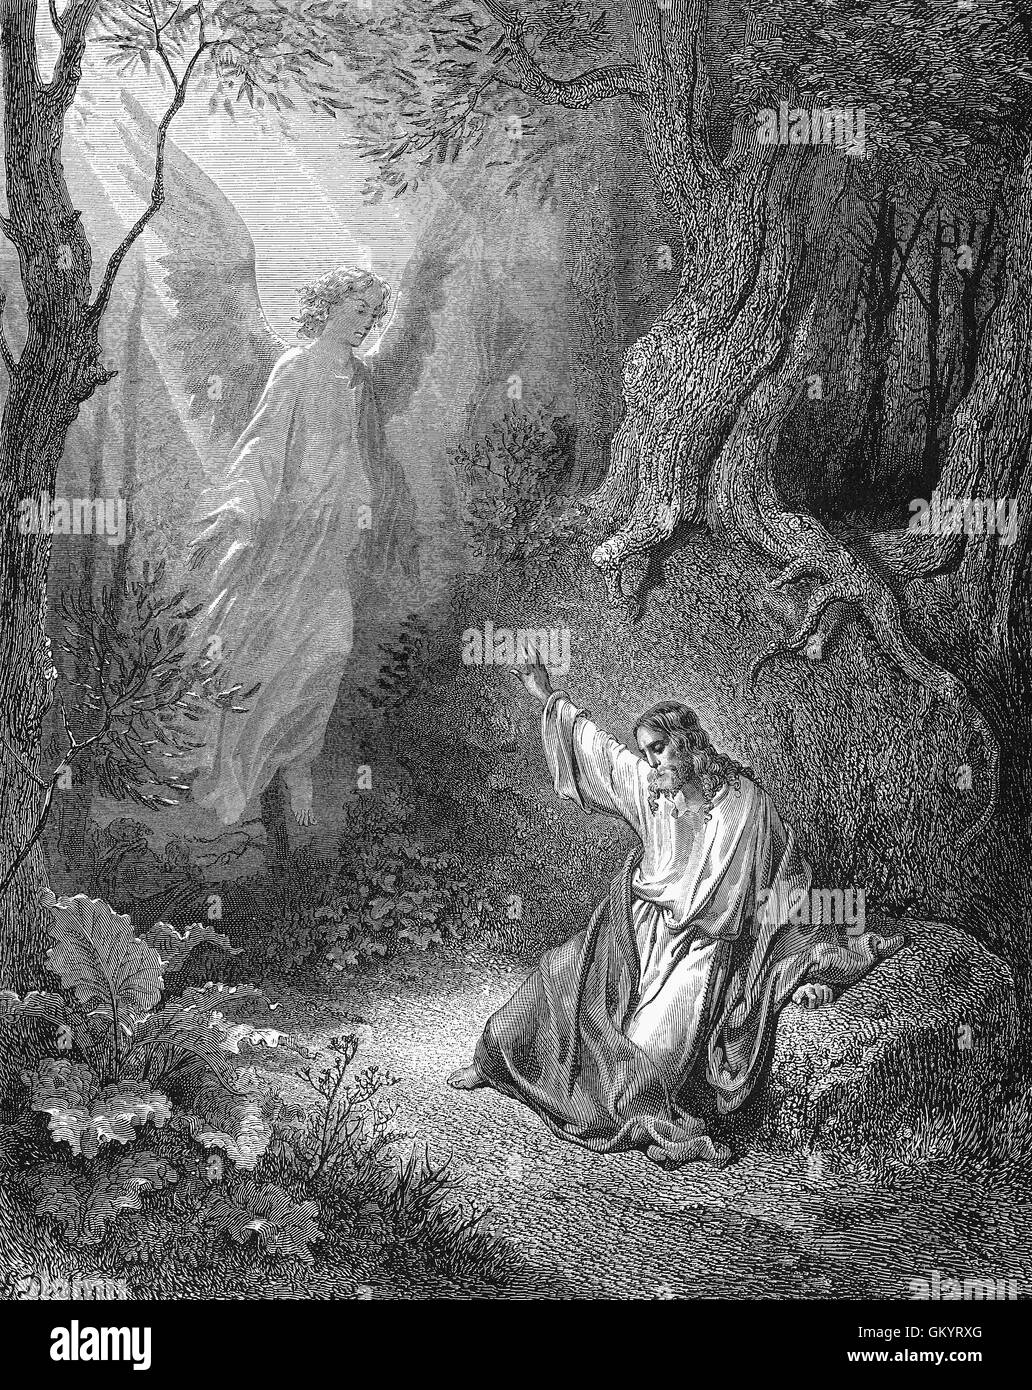 Agony In The Garden Stock Photos & Agony In The Garden Stock Images - Alamy